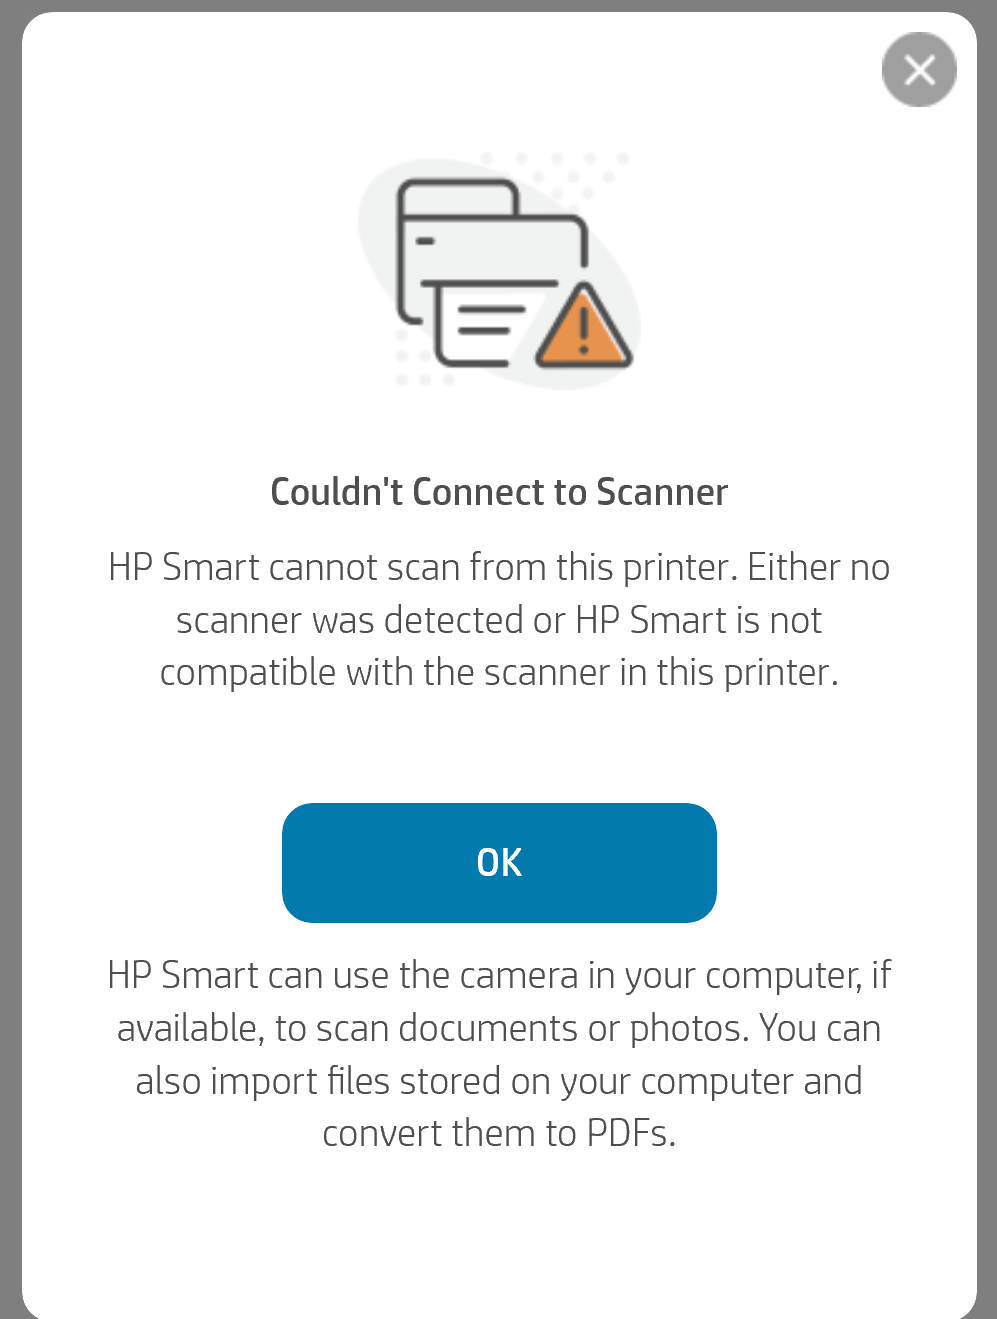 F2400 Scanning problems - HP Support Community - 8170380